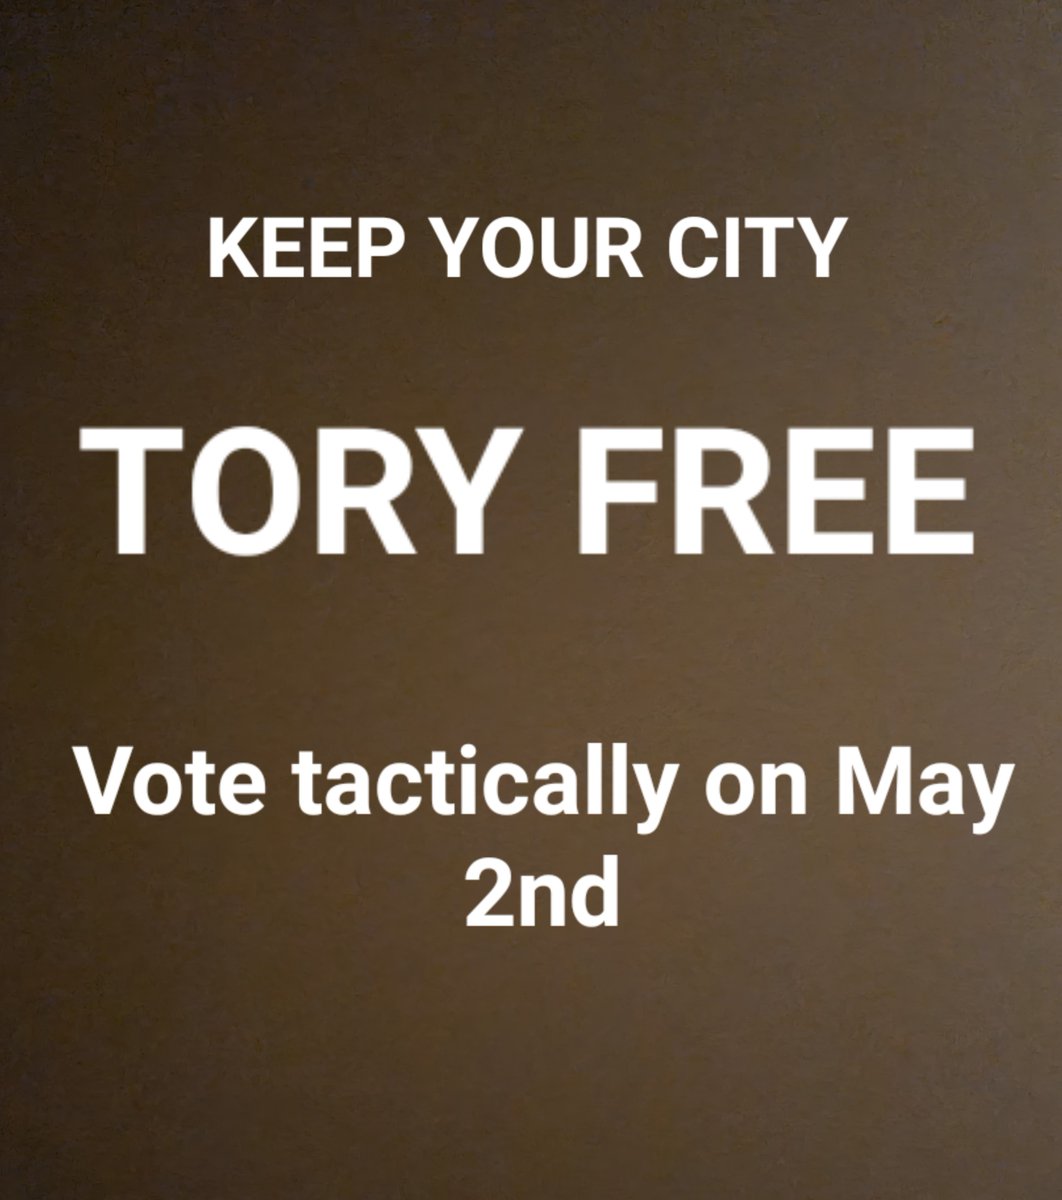 Morning midnighters...please remember you need Photo ID...you have untill the 24th April...don't lose your voice...also join us nightly in our digital protest against these criminals 00.00 to 01.00 tonight's tag #ToriesOut652 #GeneralElectionNow #JackanoryTorys #Bregret